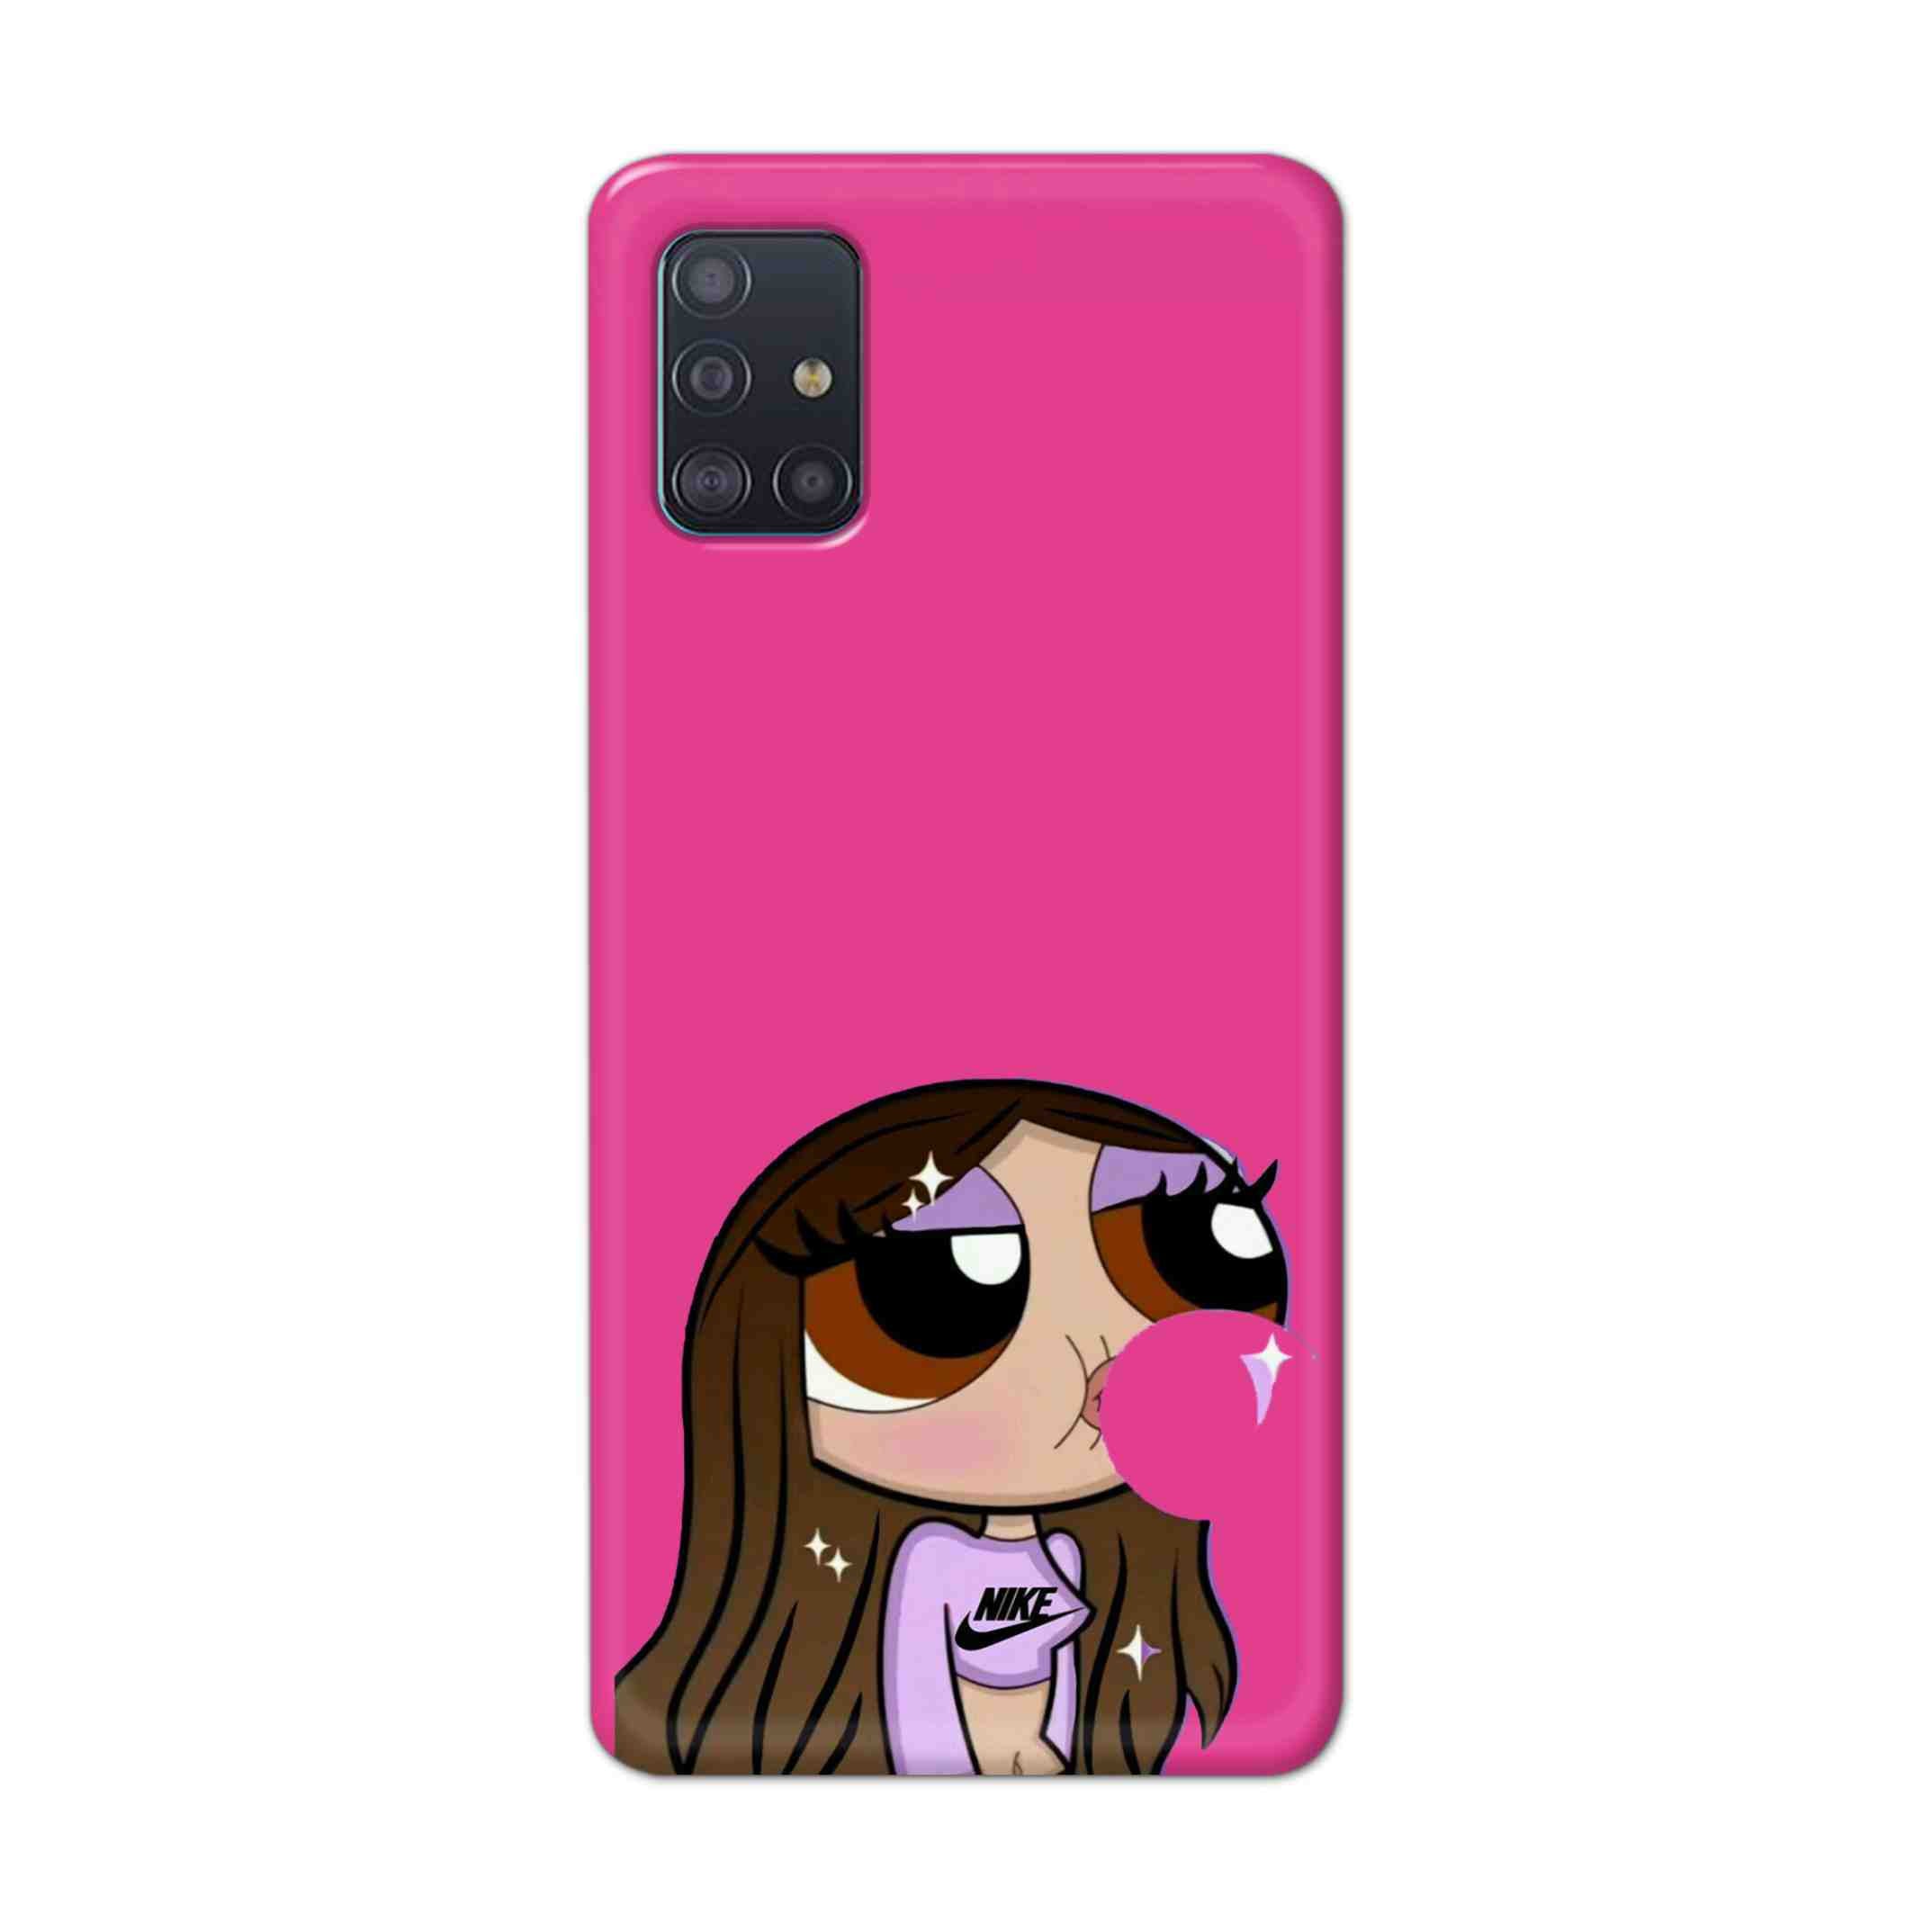 Buy Bubble Girl Hard Back Mobile Phone Case Cover For Samsung Galaxy A71 Online